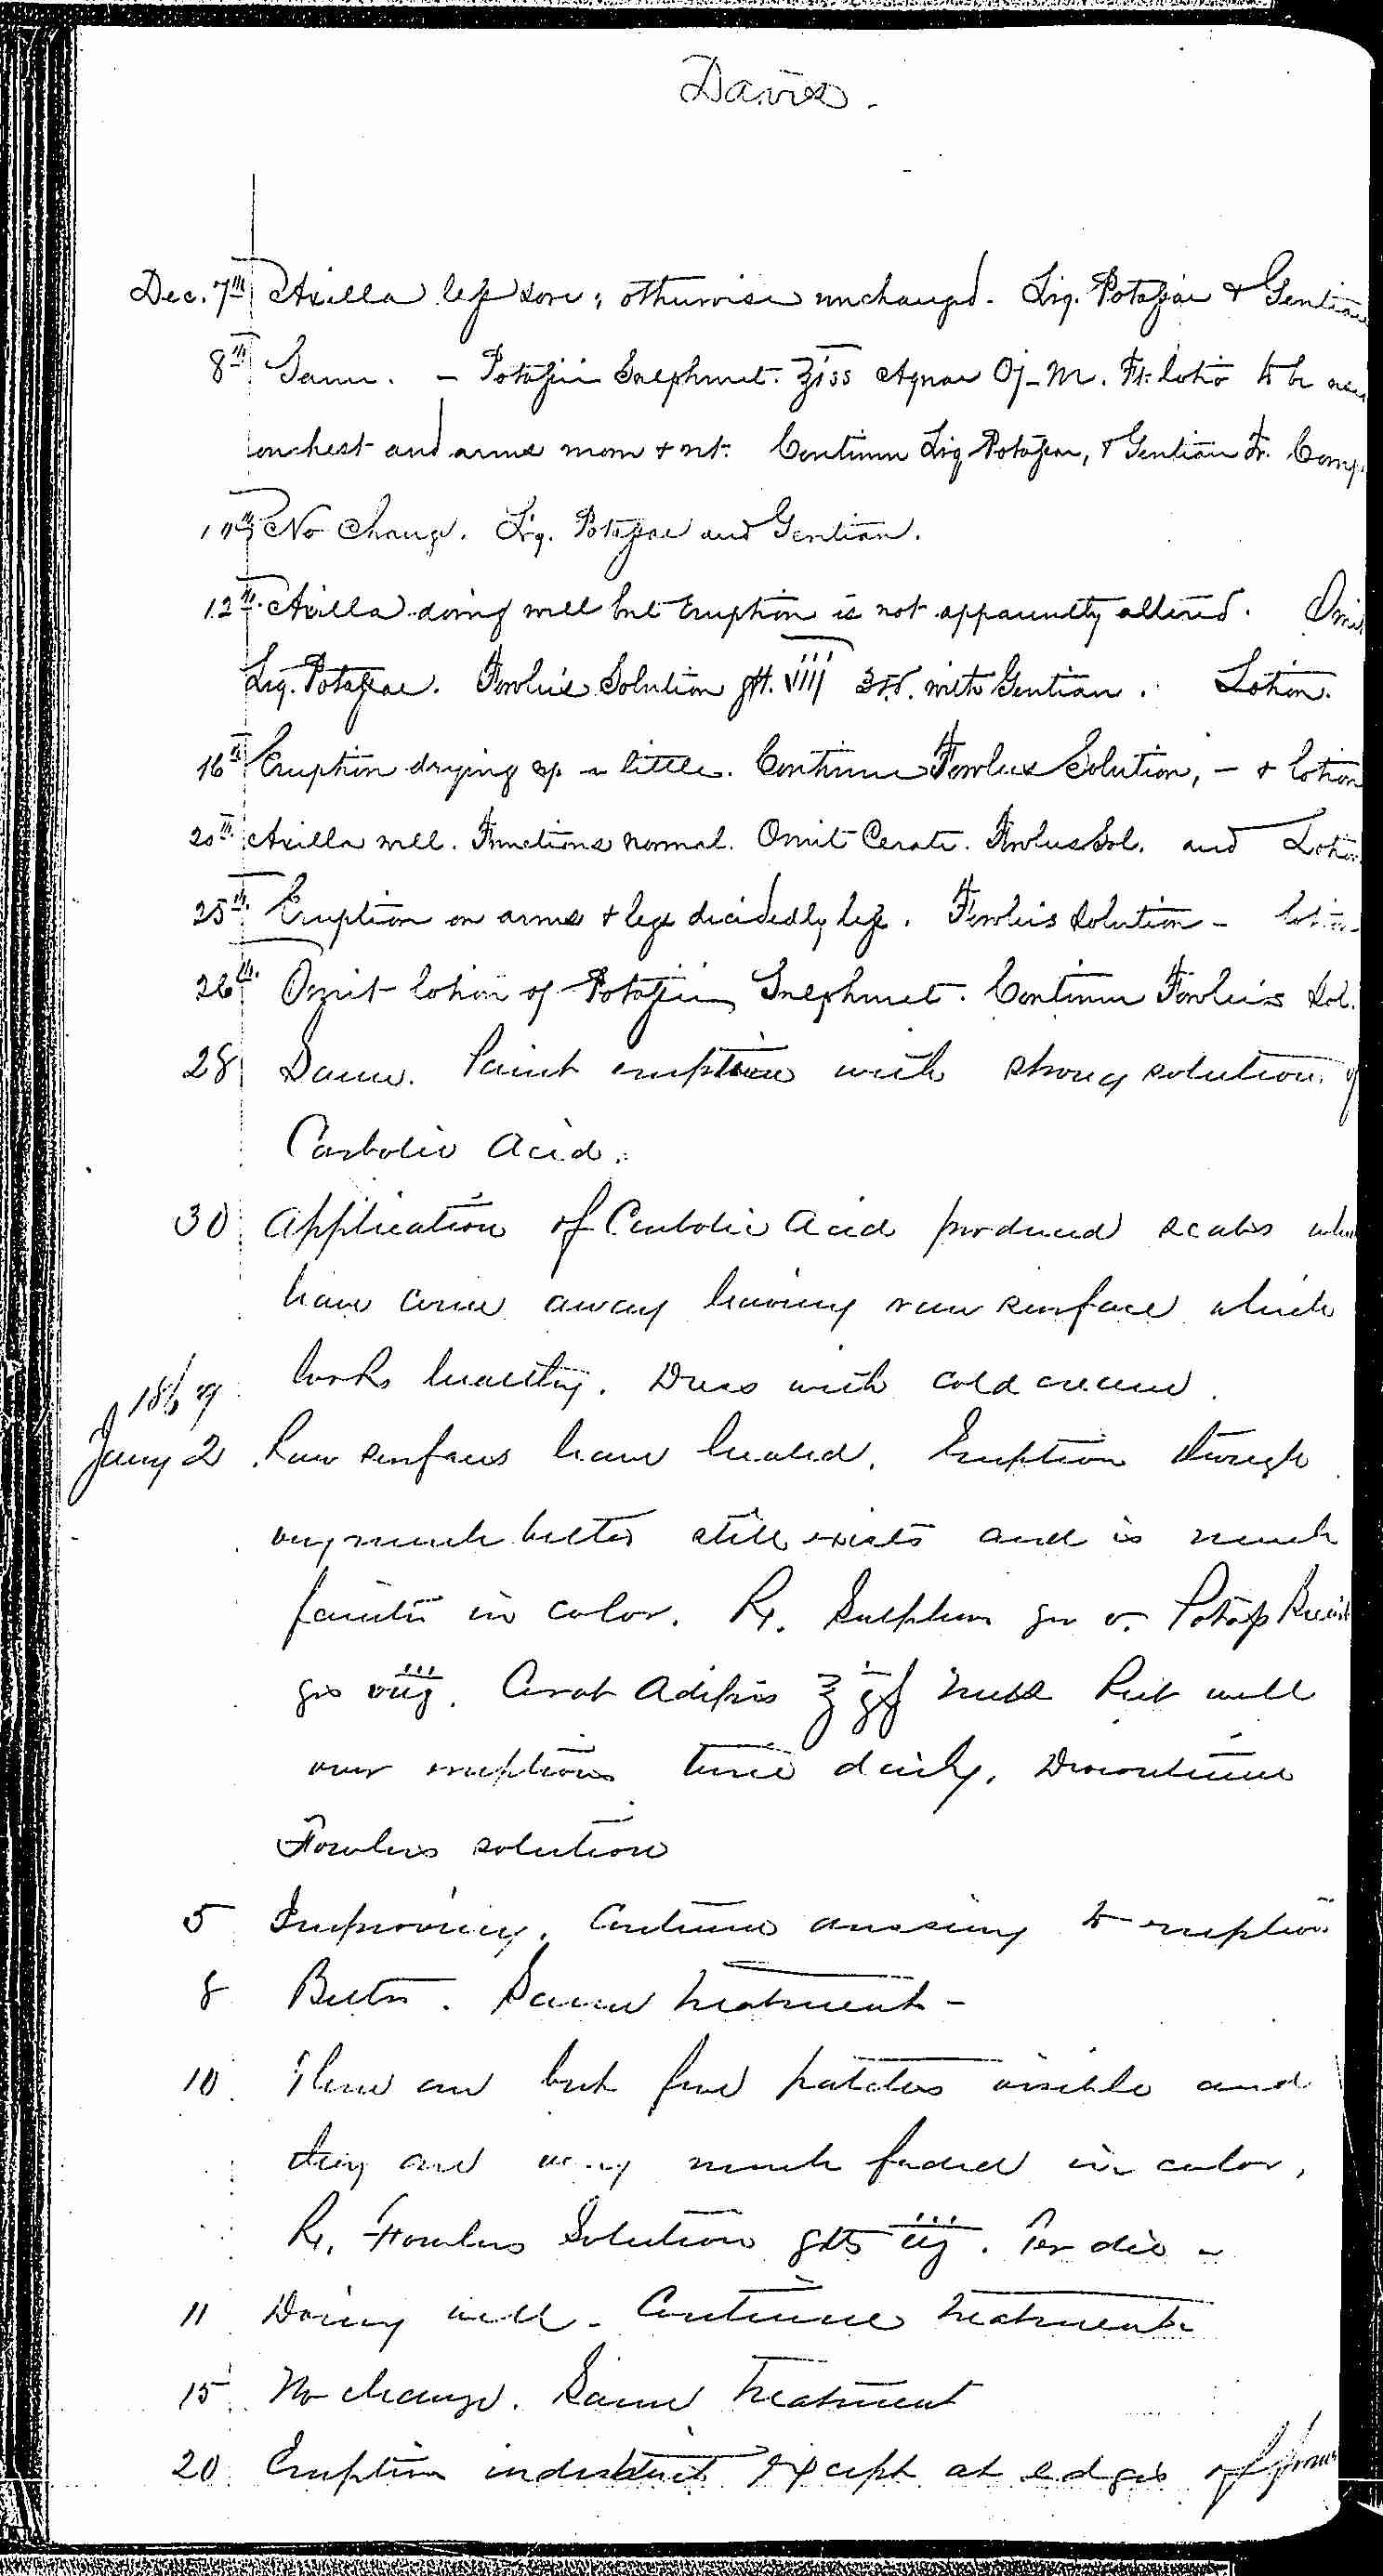 Entry for Edward Davis (page 2 of 6) in the log Hospital Tickets and Case Papers - Naval Hospital - Washington, D.C. - 1868-69